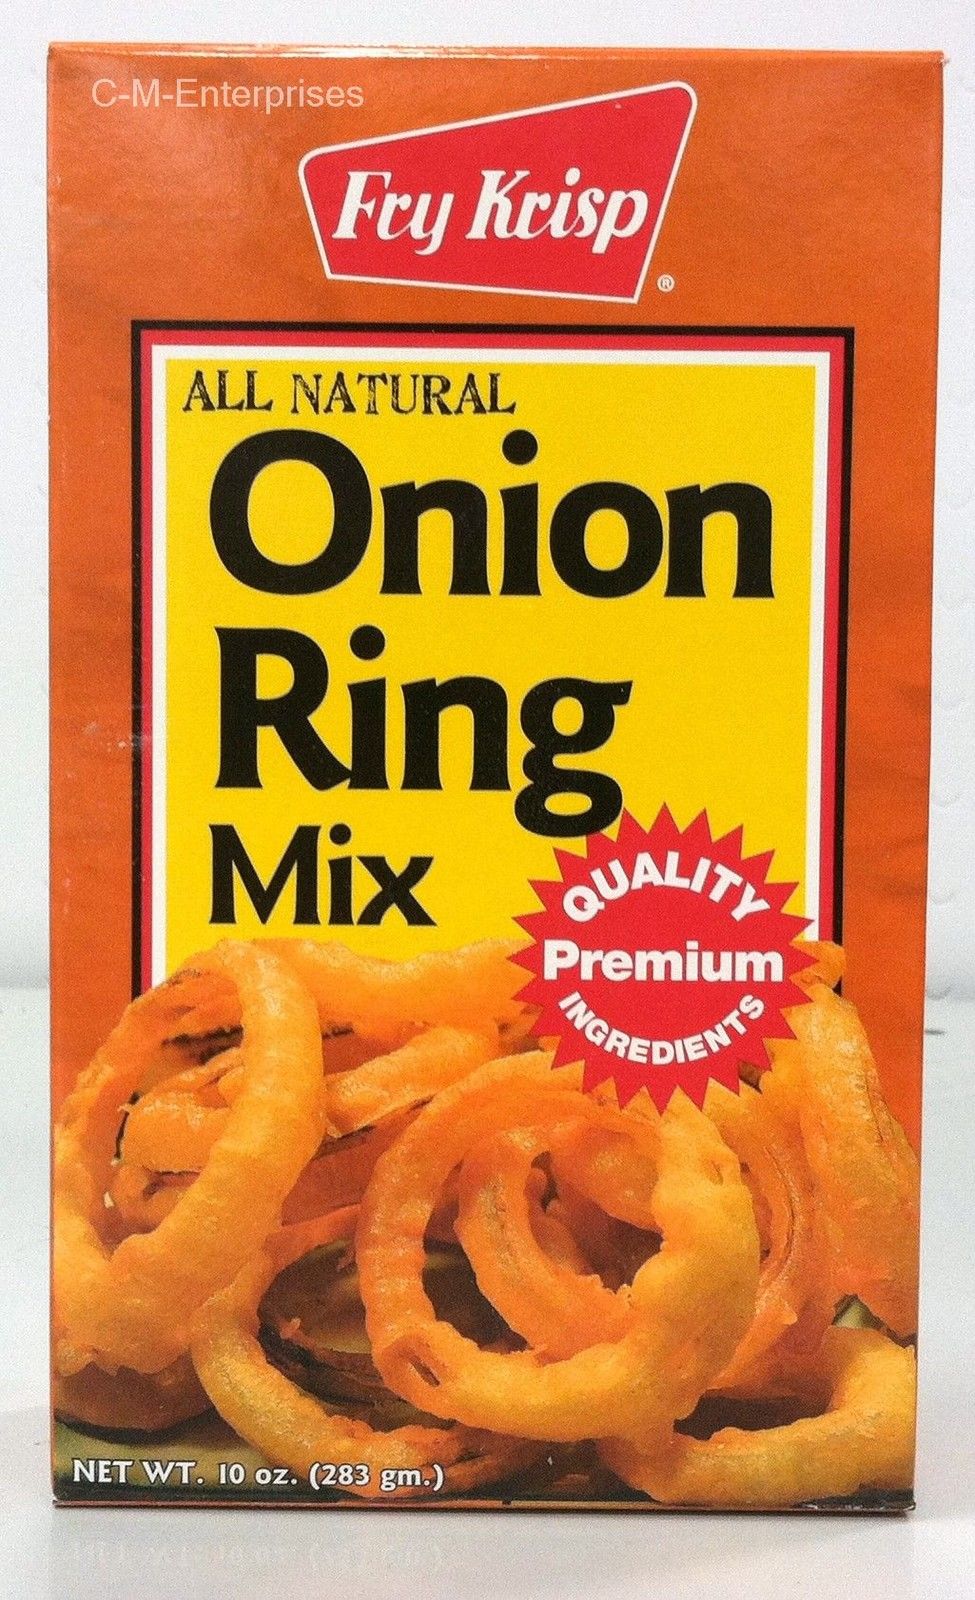 FRY KRSP ONION RING